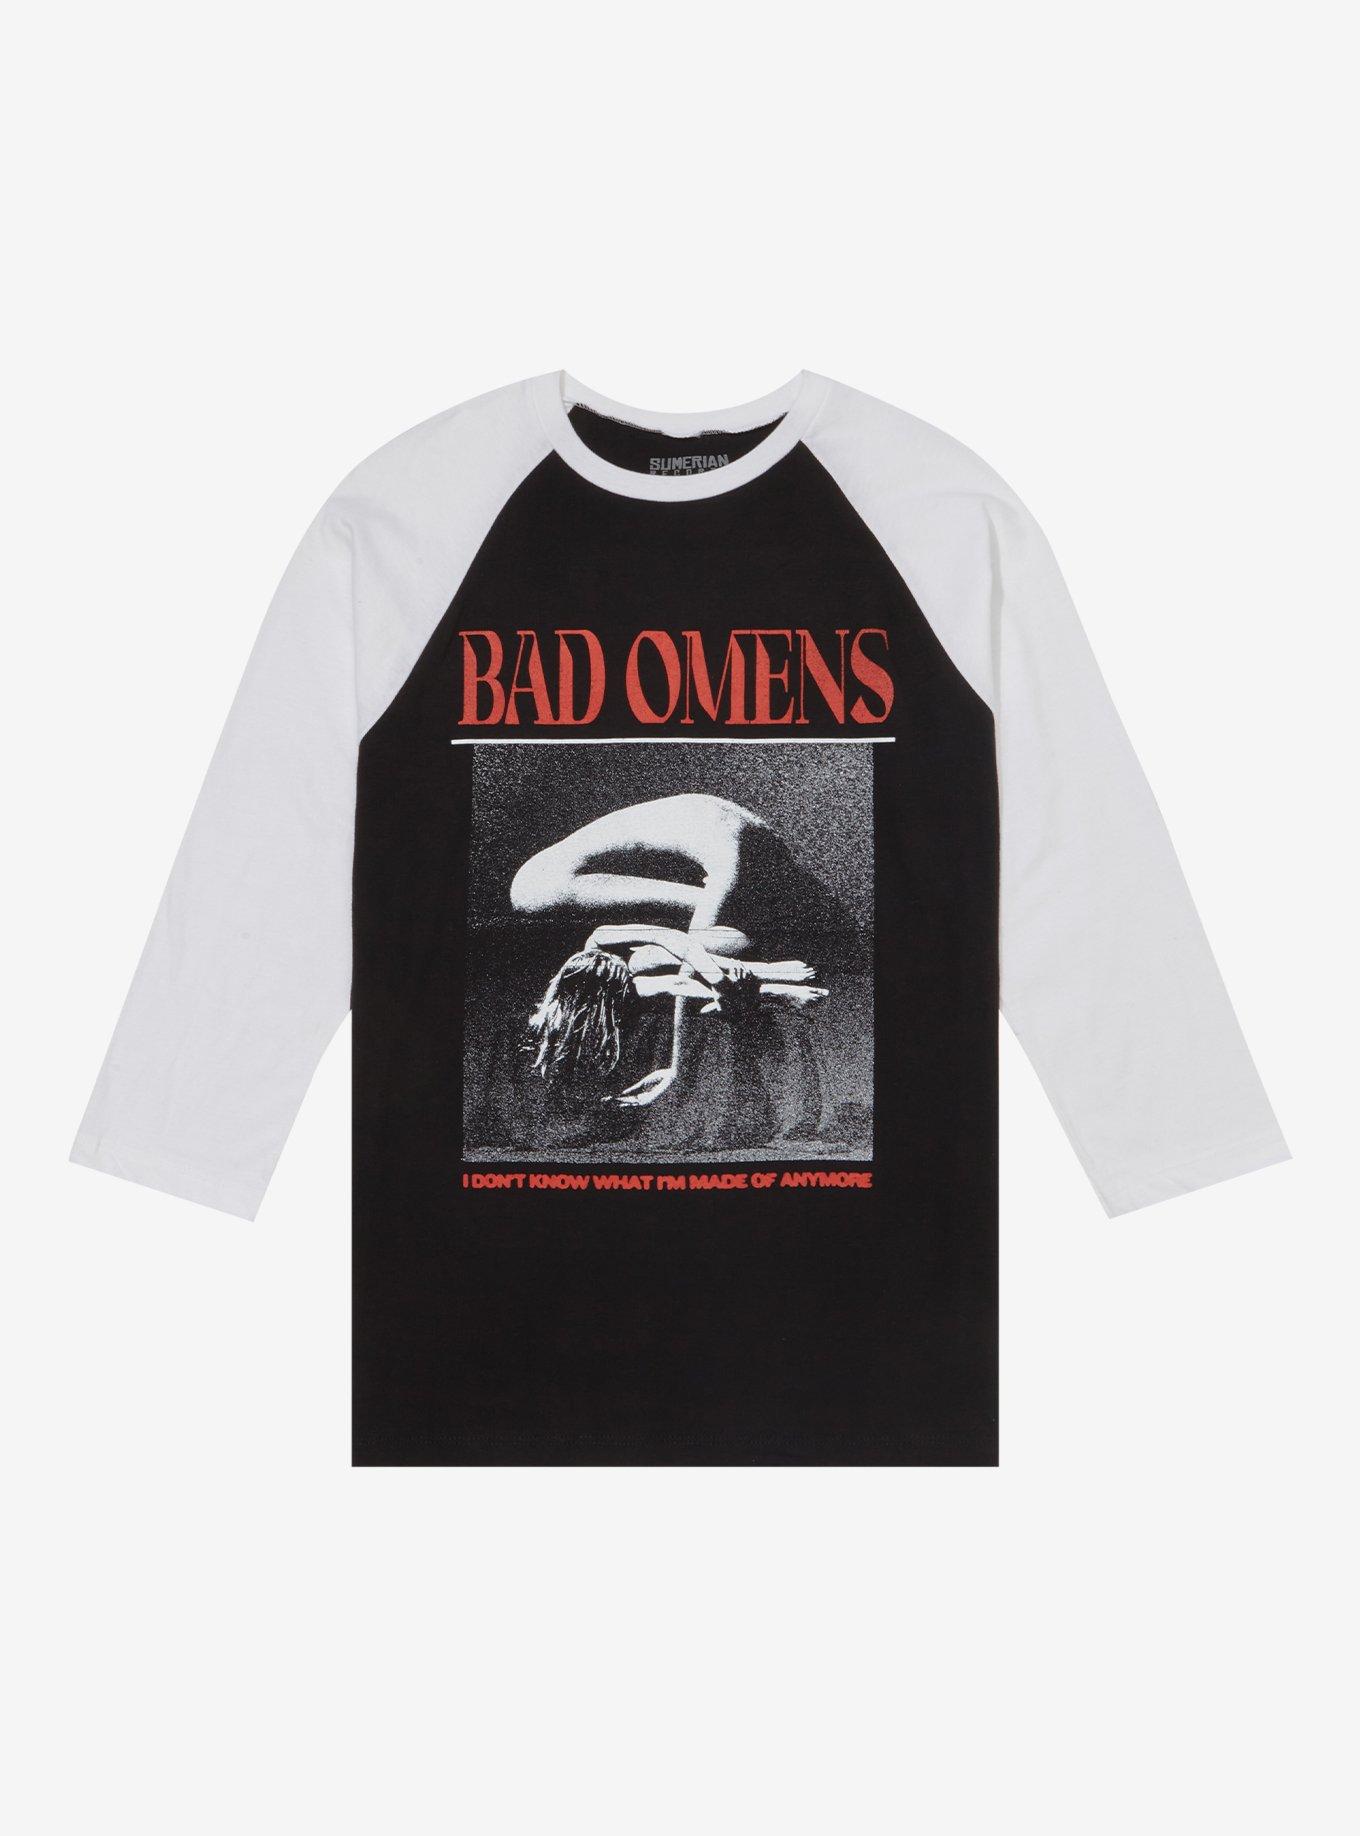 Bad Omens Band Track List Jungle Tour T-shirt,Sweater, Hoodie, And